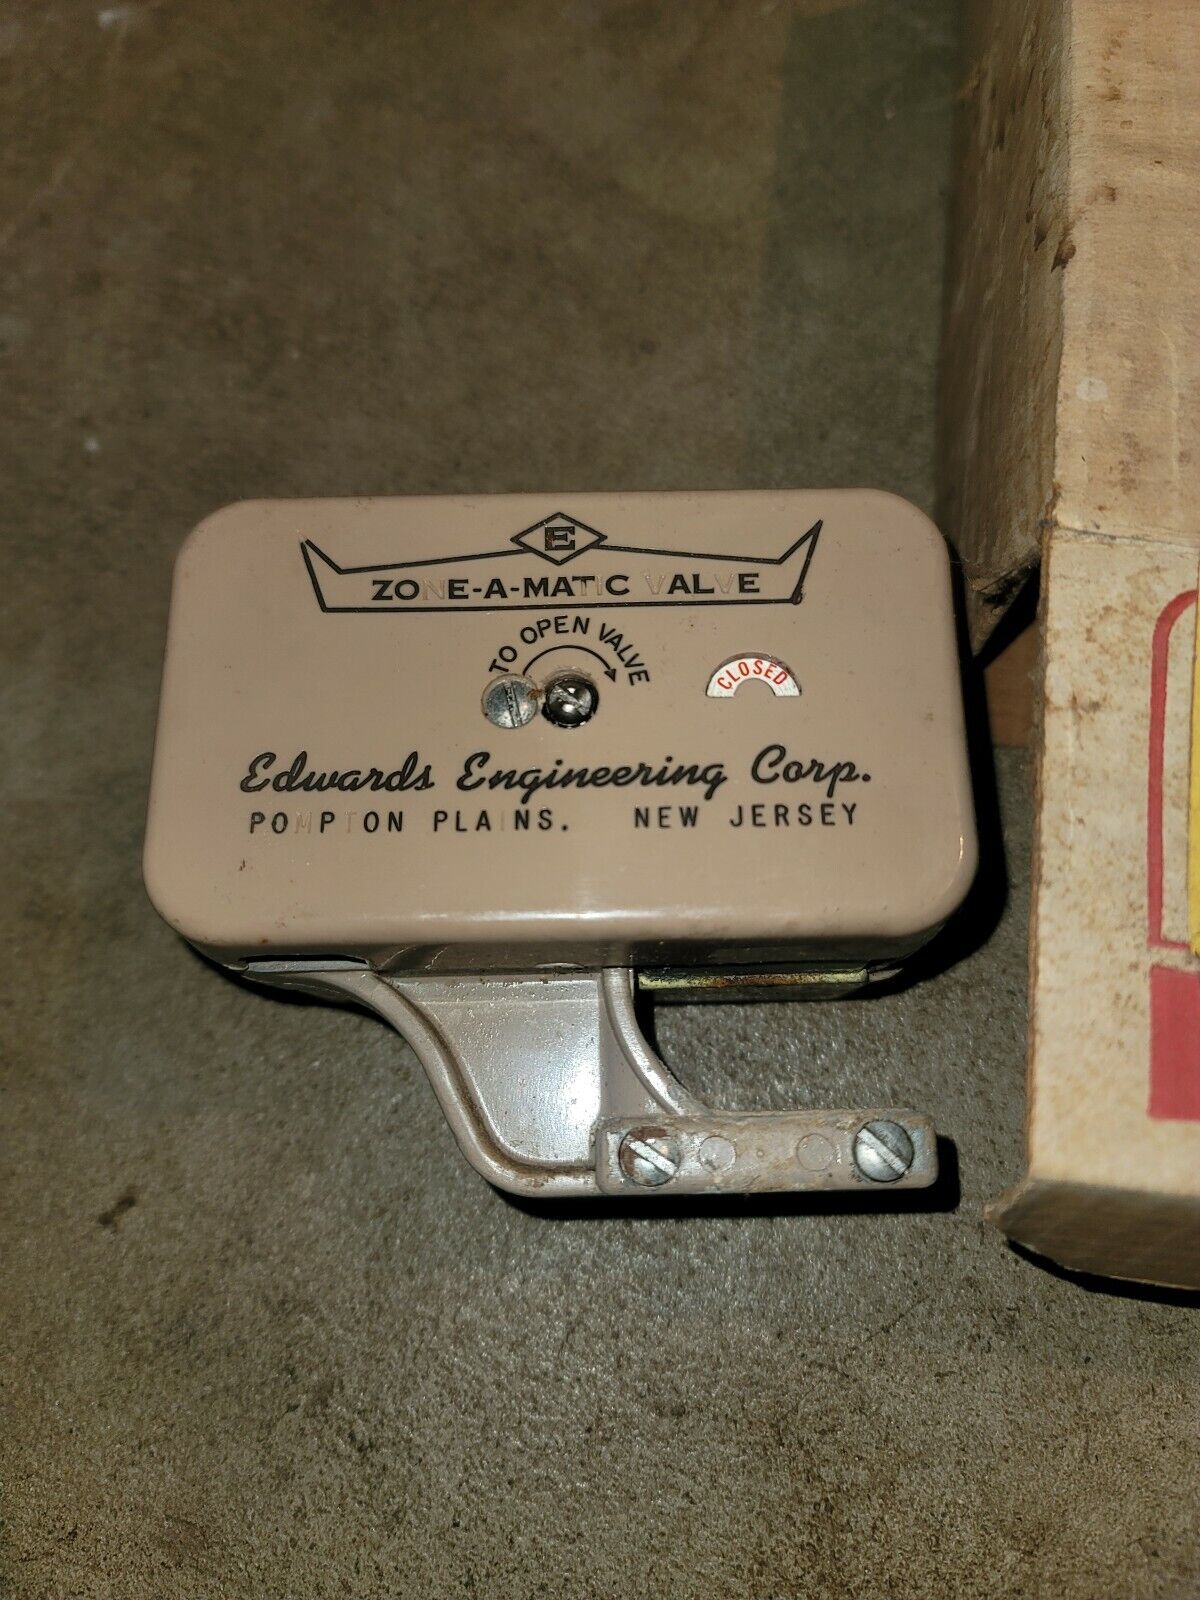 Edwards Engineering Corp Zone-A-Matic Valve Motor Assembly Model V 601 Series 20